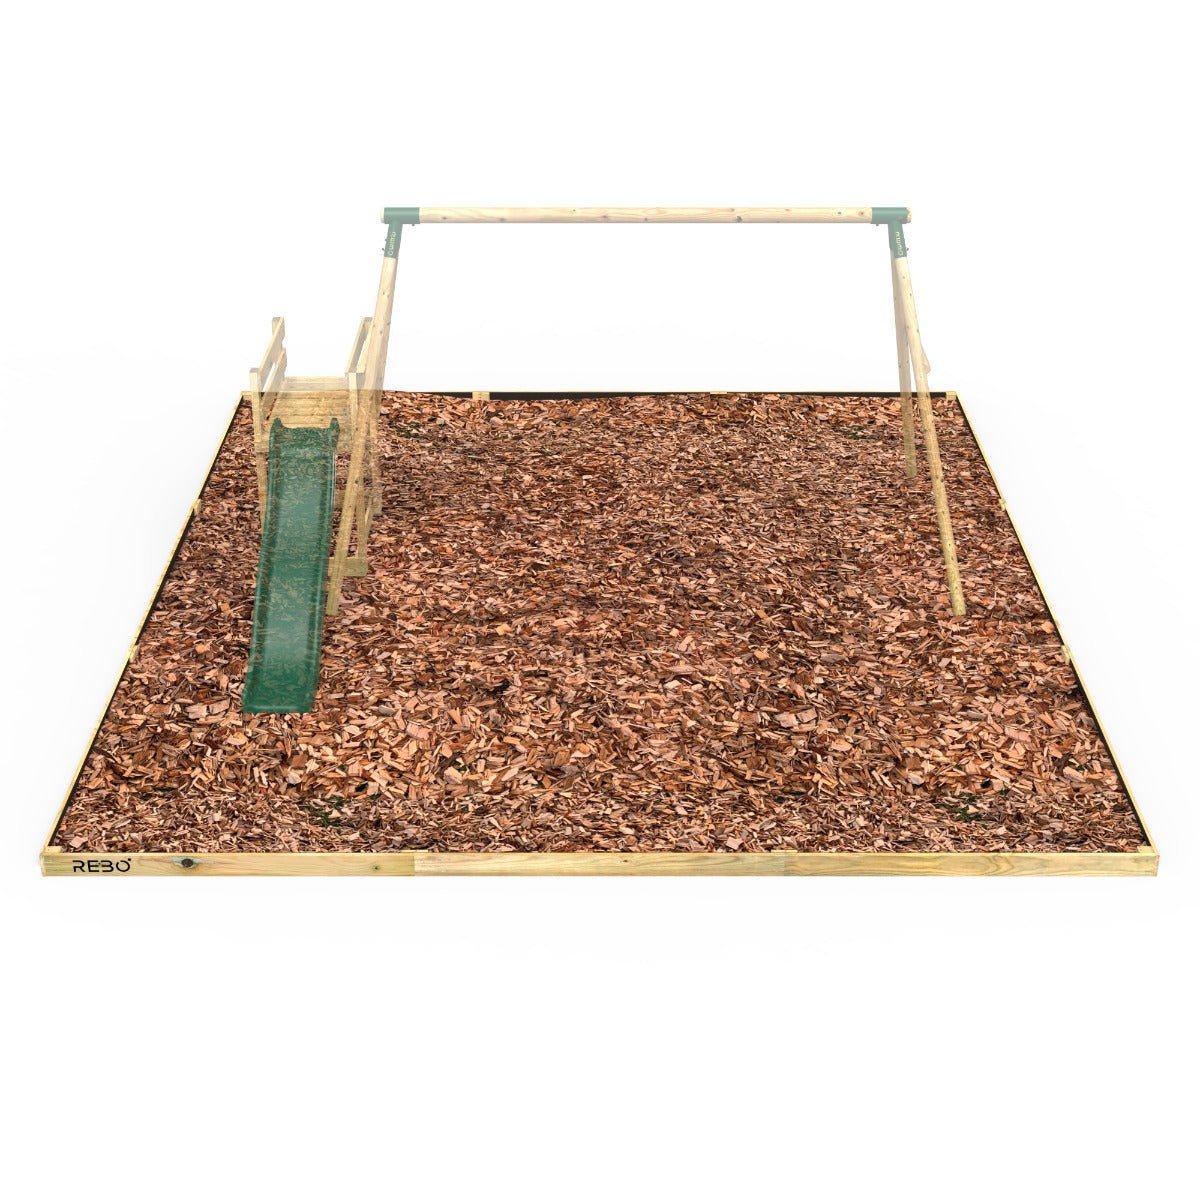 Rebo Safety Play Area Protective Bark Wood Chip Kit - 5.1M x 5.1M